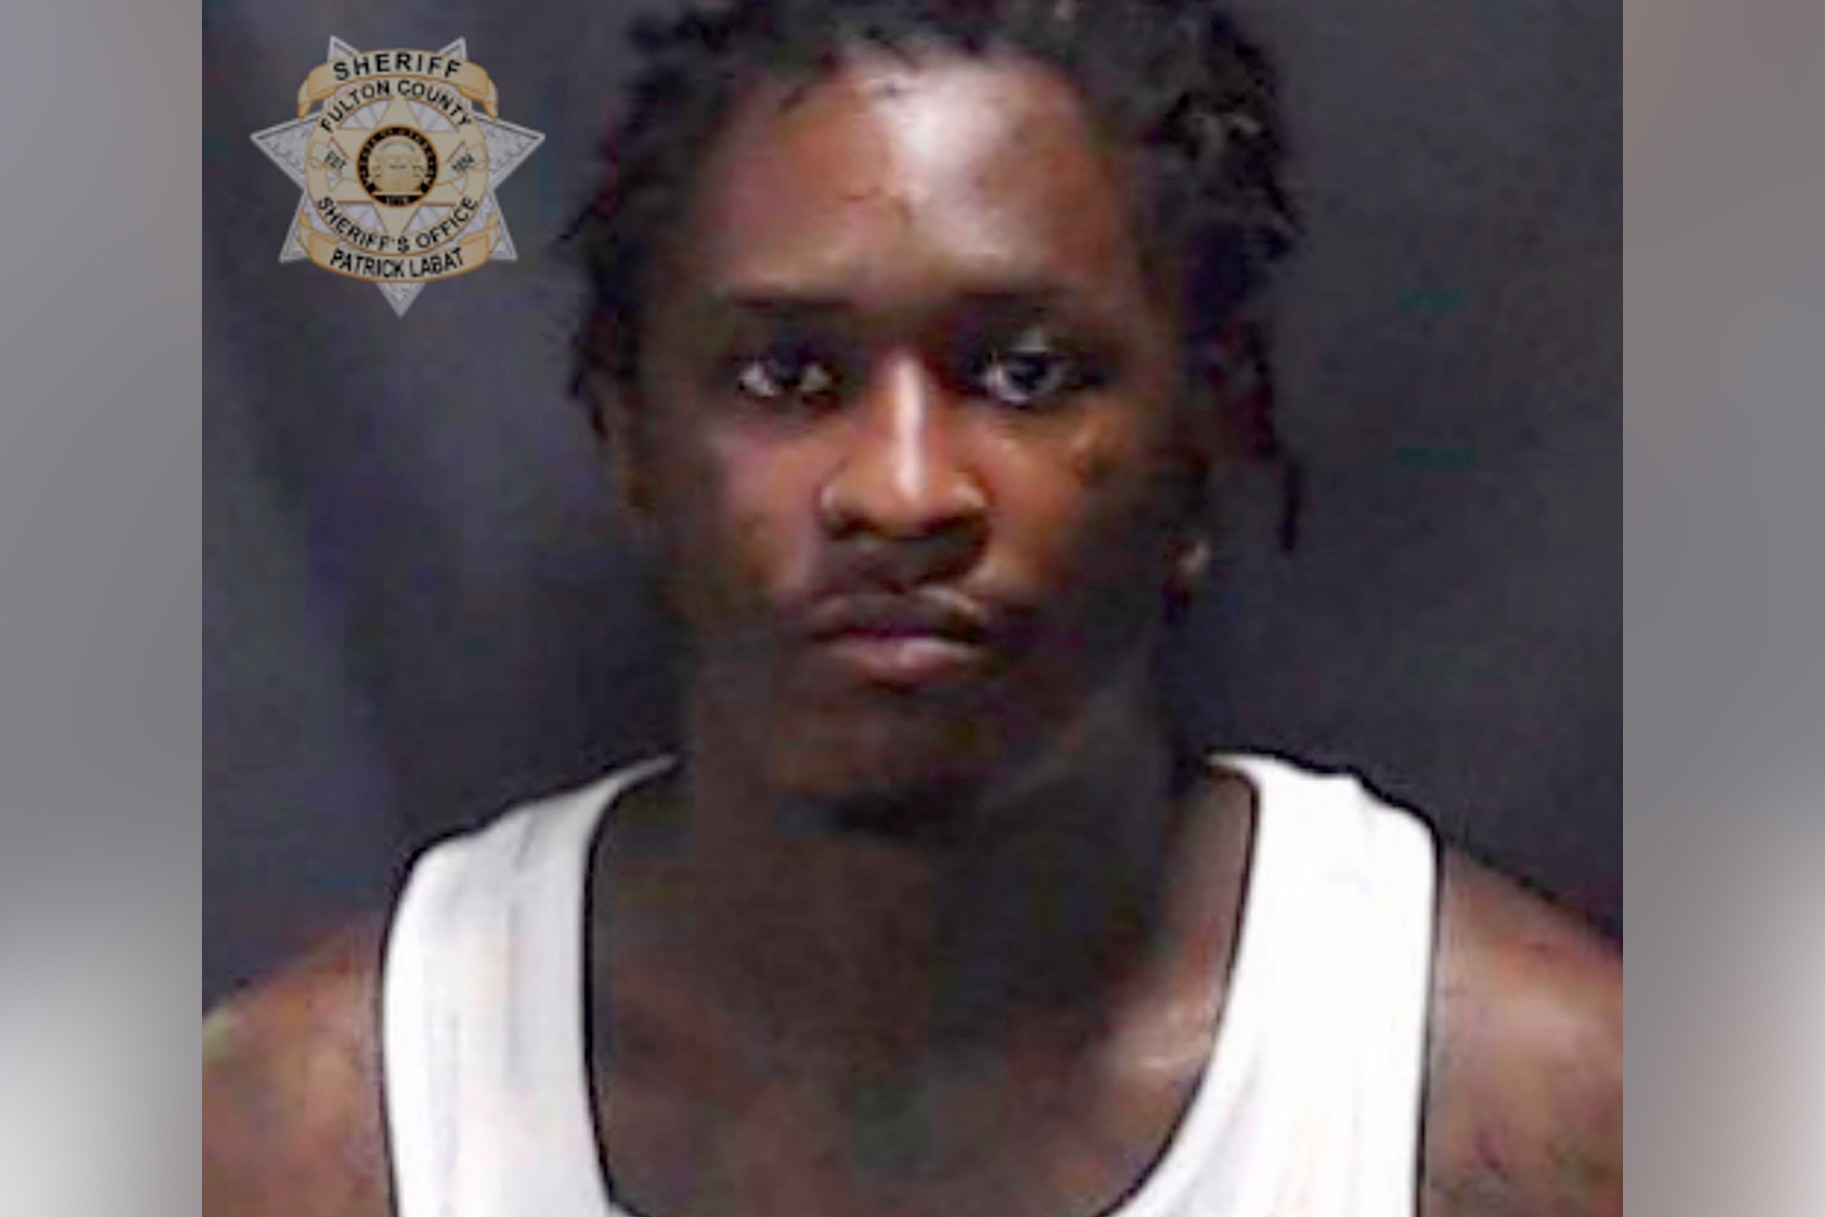 The booking photo of Atlanta rapper Young Thug